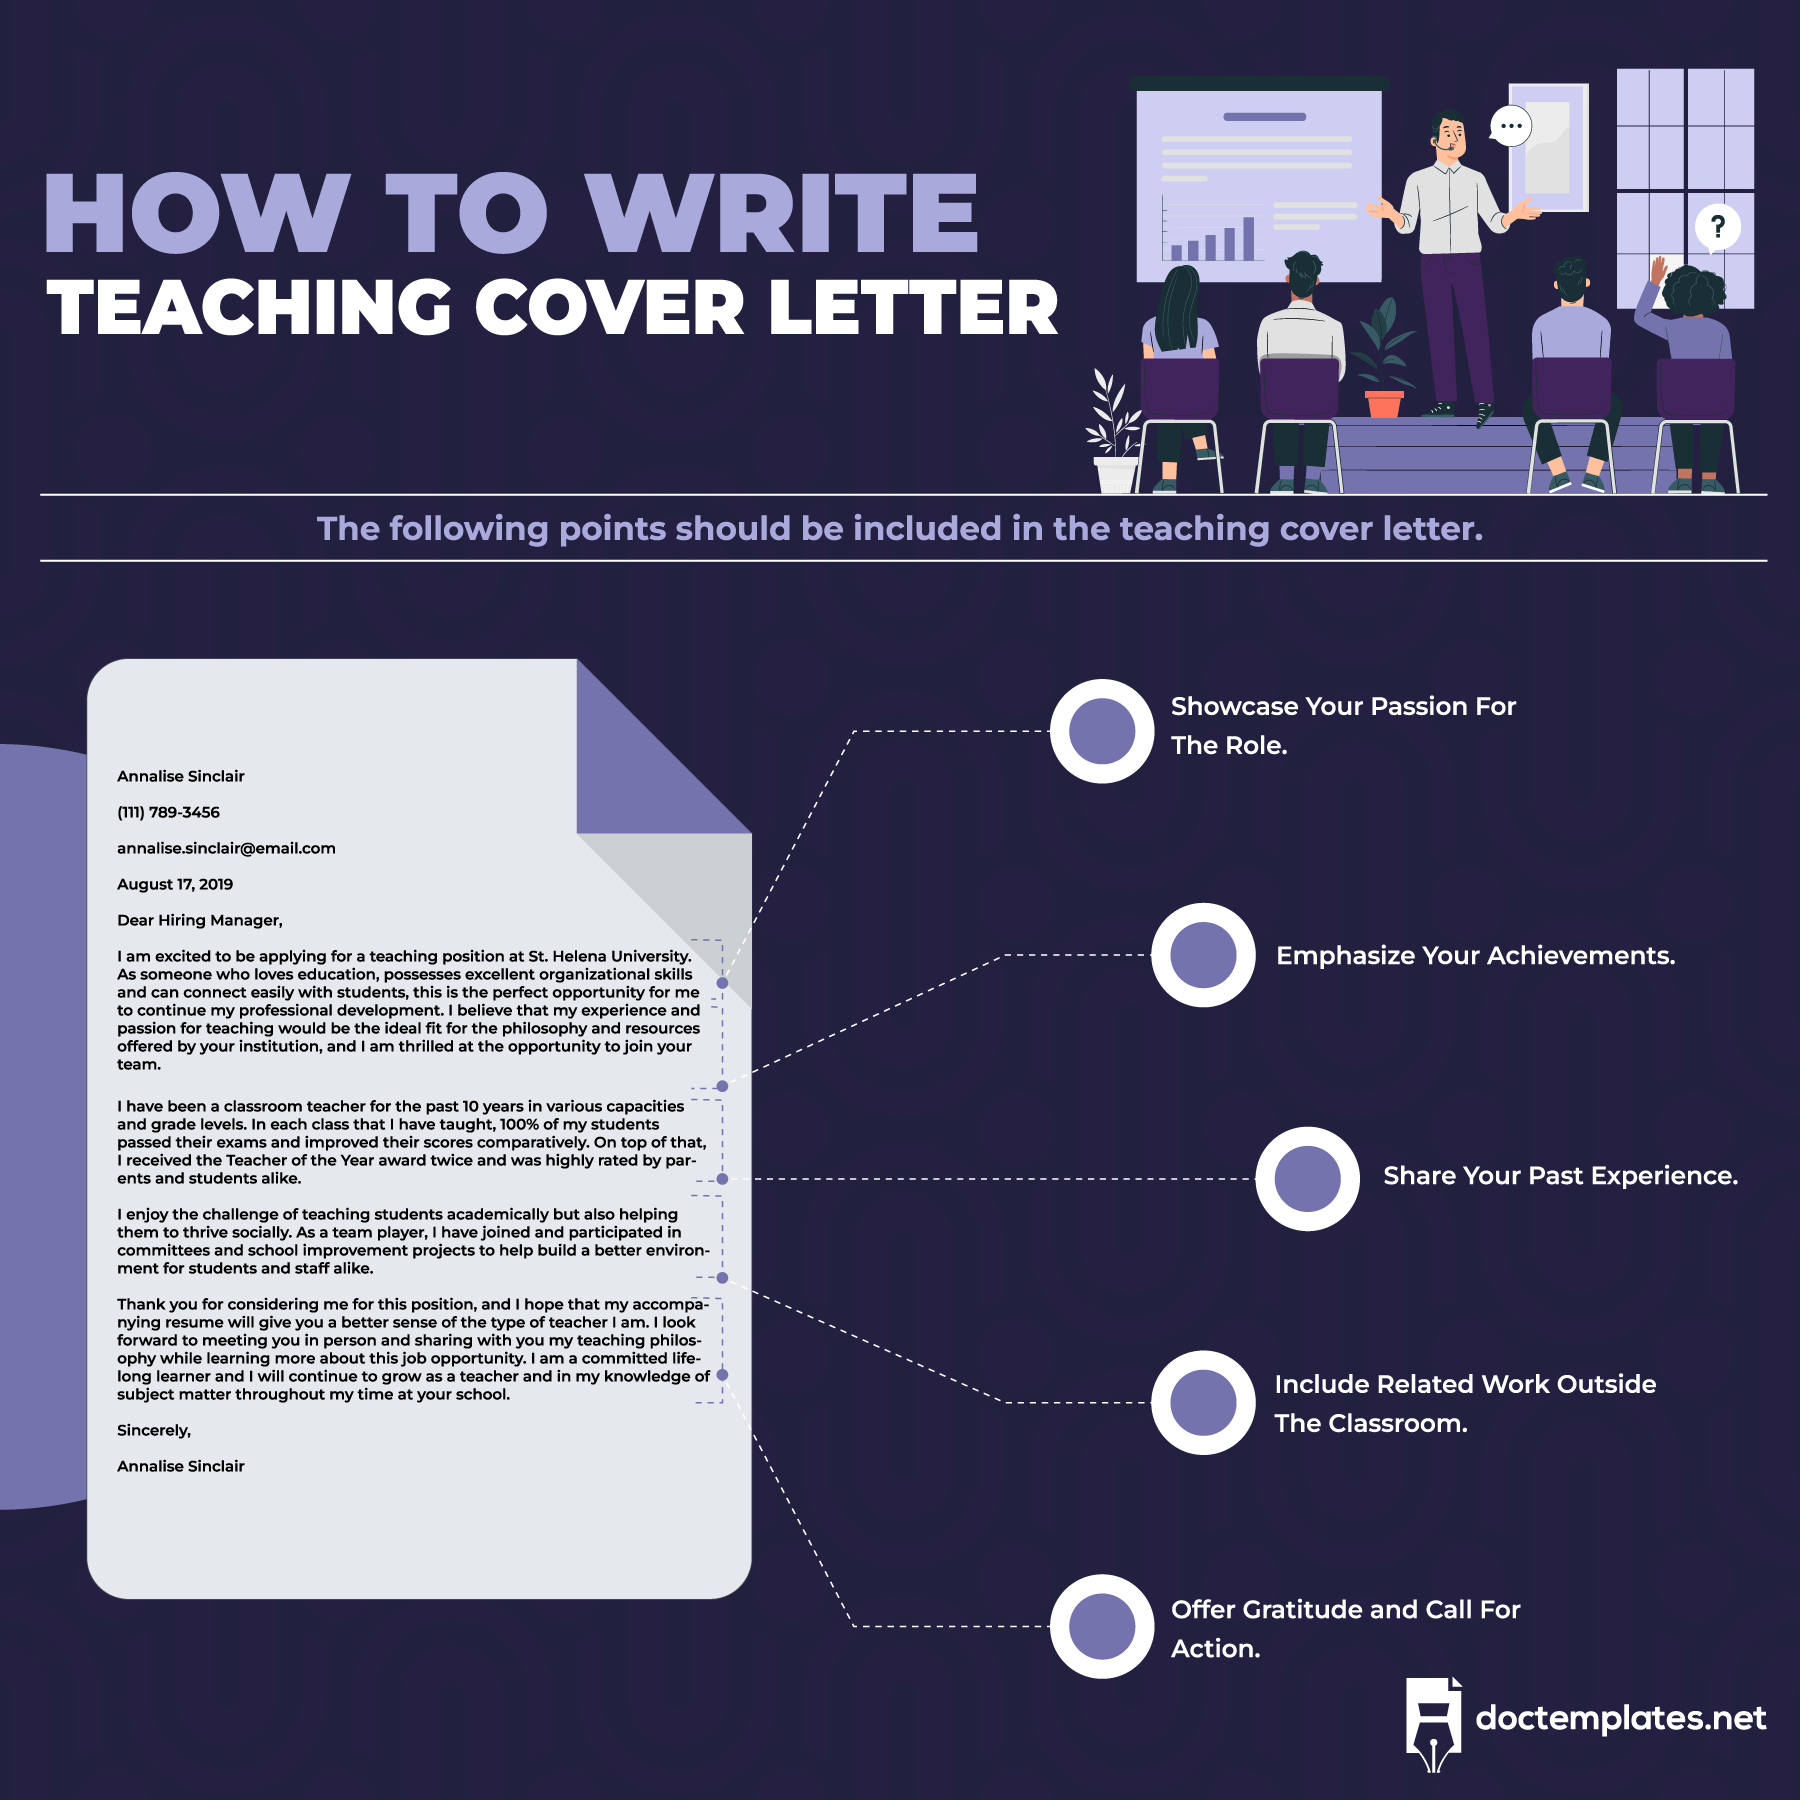 This infographic is about writing teaching cover letter.